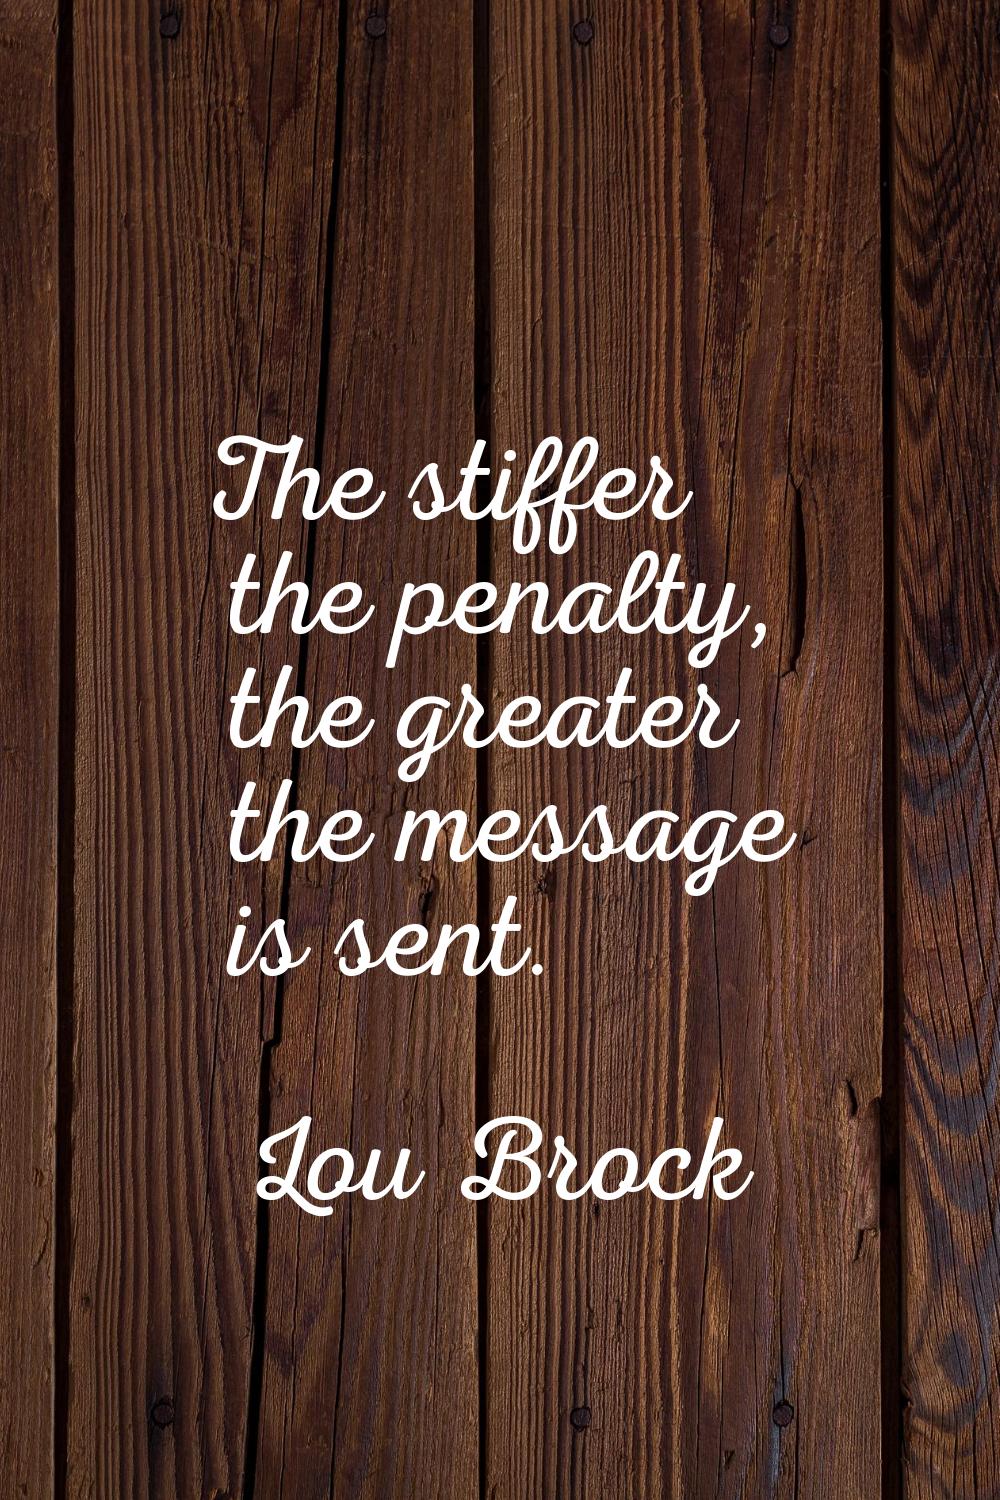 The stiffer the penalty, the greater the message is sent.